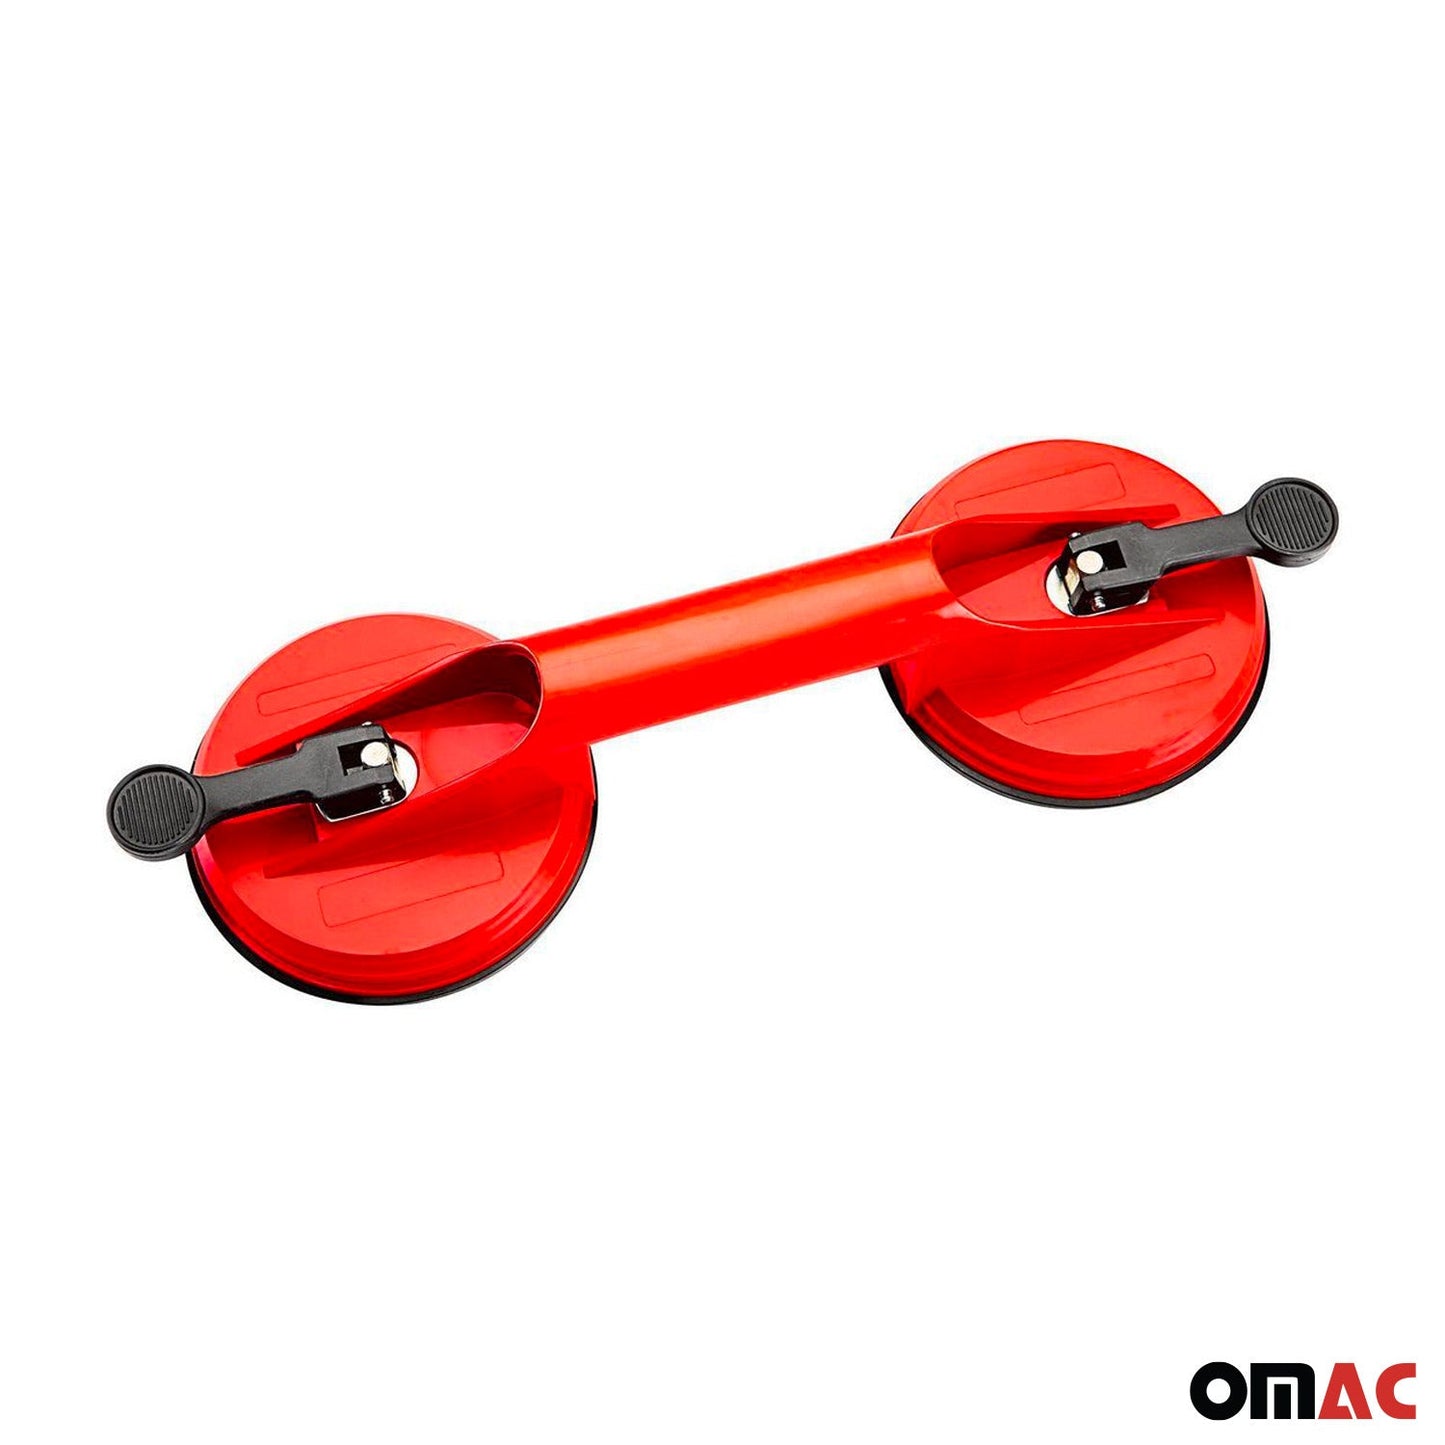 OMAC Double Suction Cup Vacuum Lifter for Glass Lifting Granite Mirror Handle Grip 96HF59689